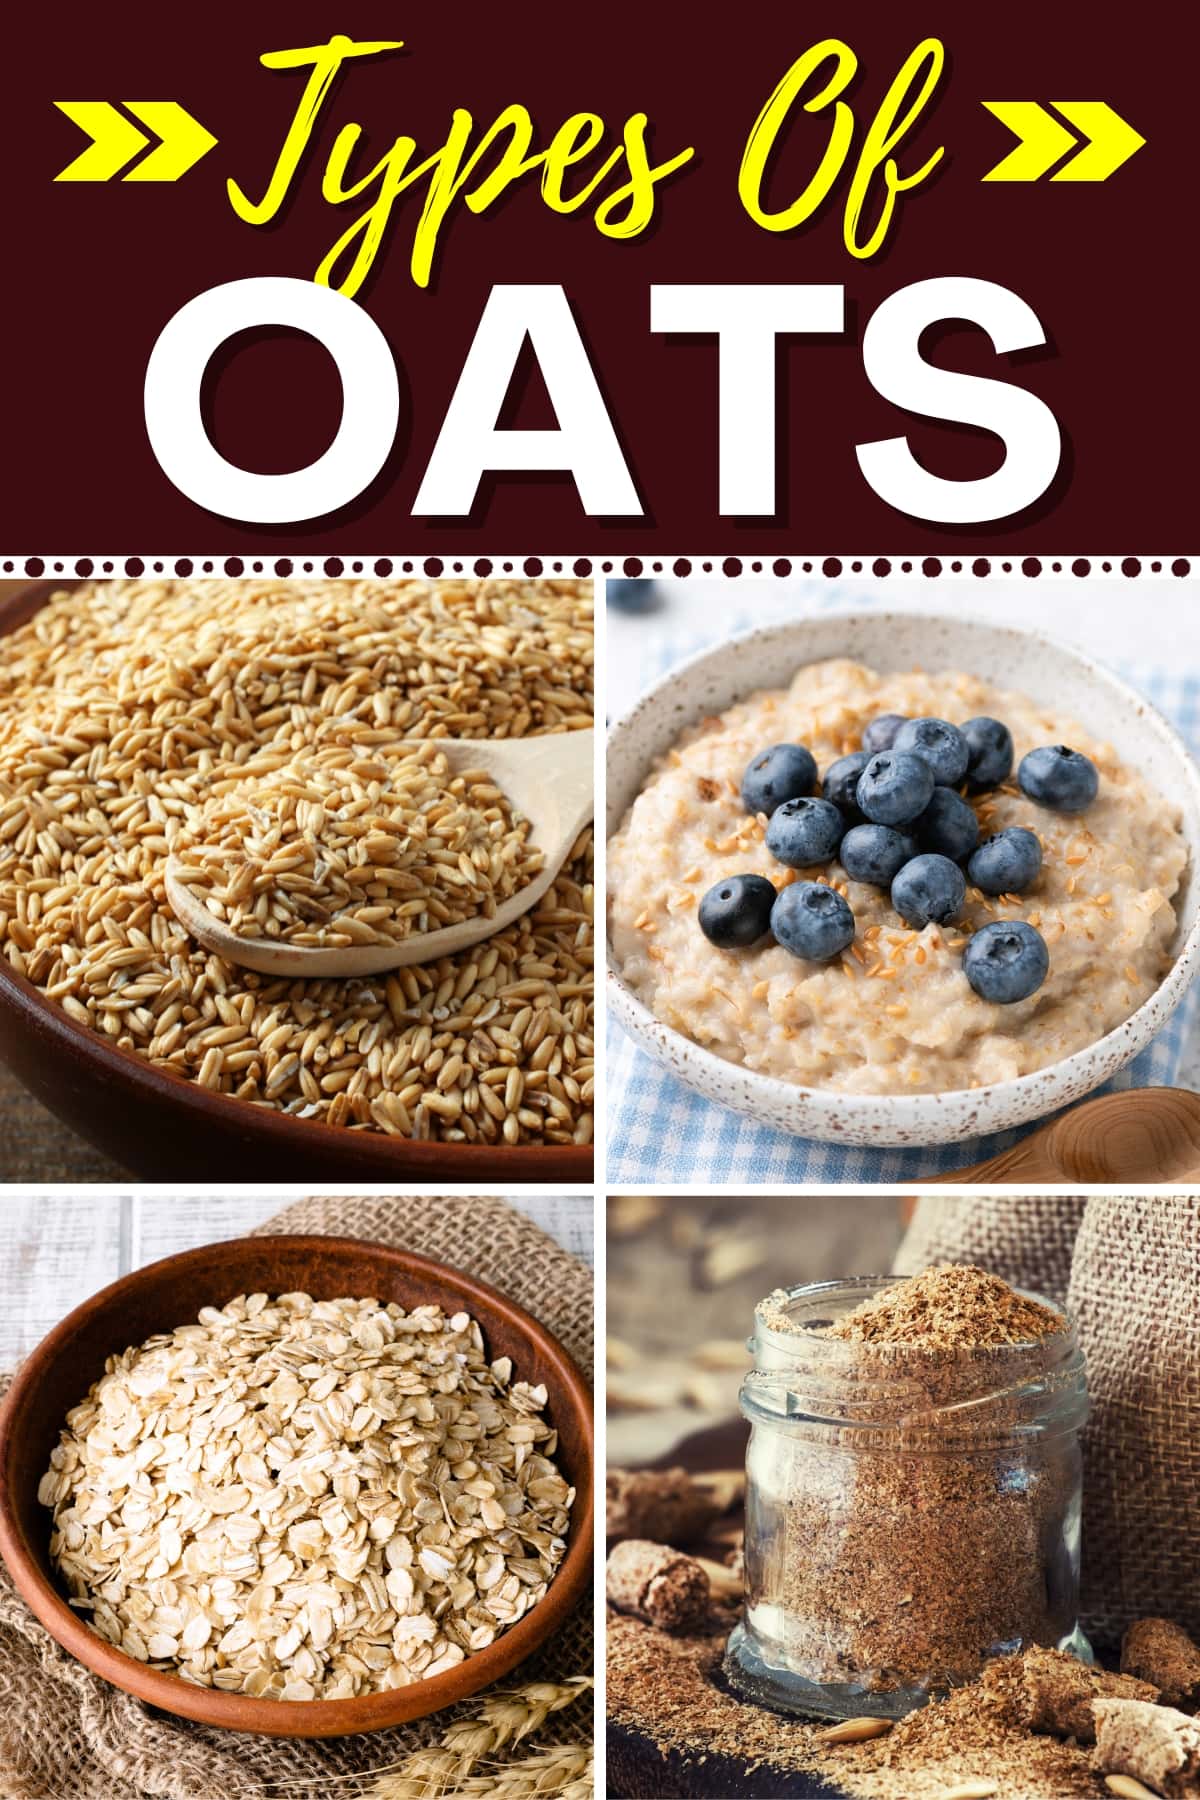 Types of Oats